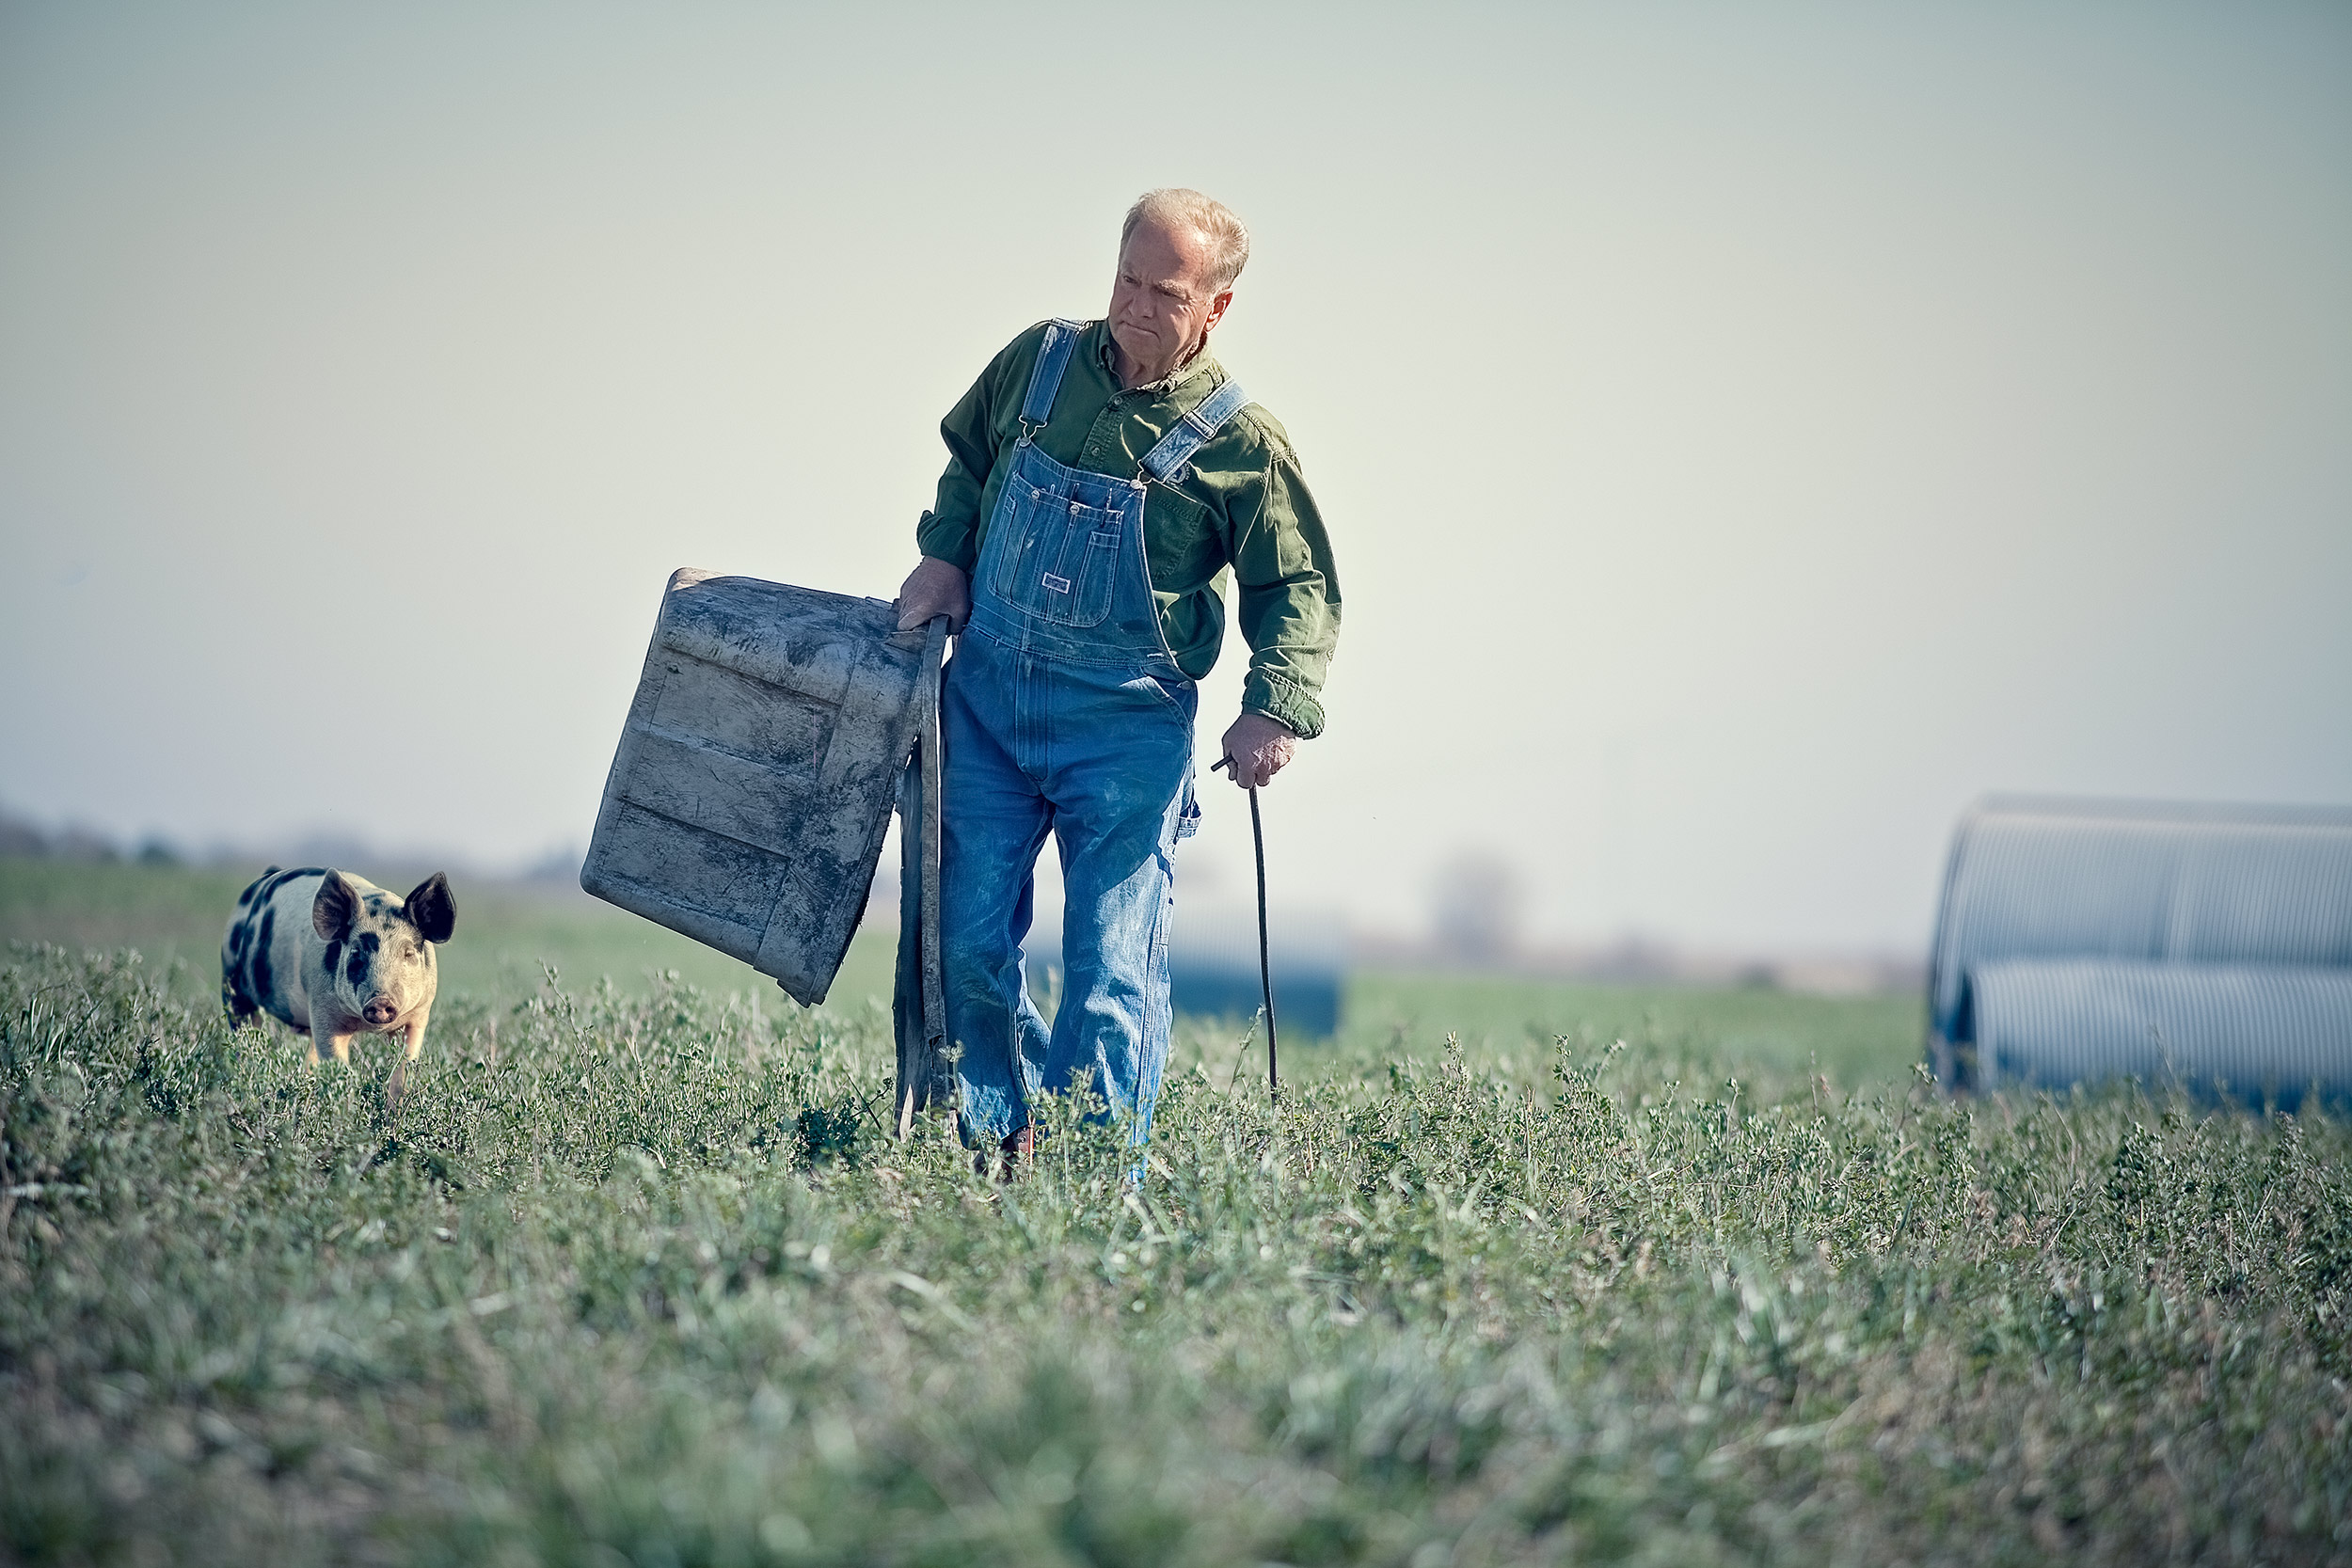 Willis Walking Agriculture Photography pig farmer walking in field with piglet and bucket